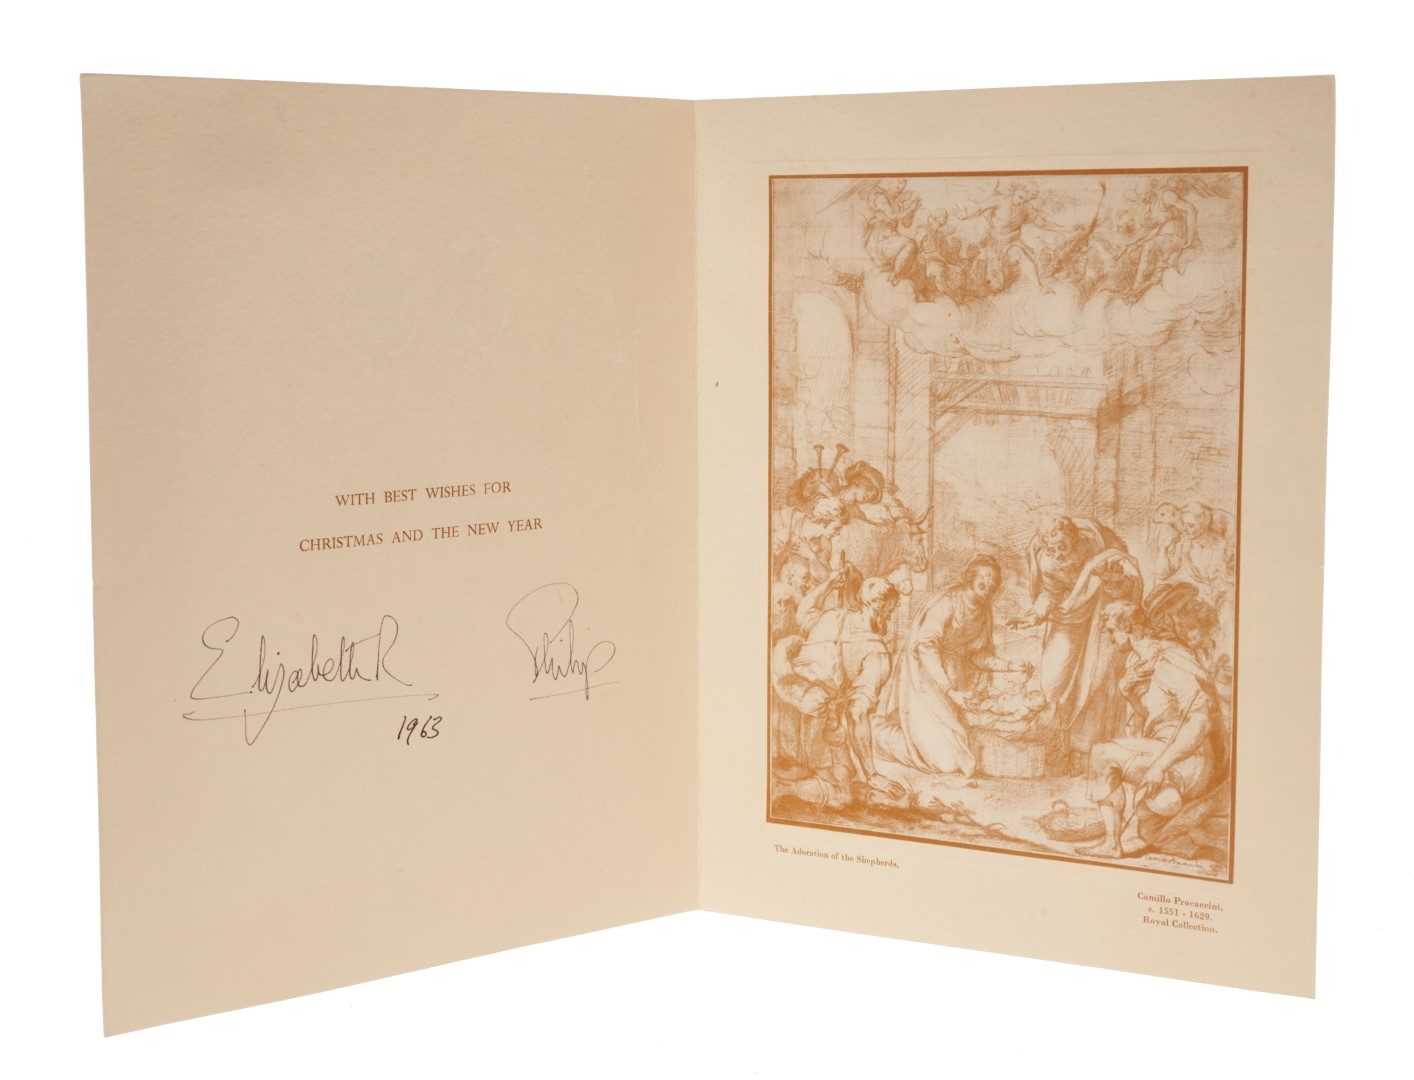 Lot 28 - H.M.Queen Elizabeth II and H.RH. The Duke of Edinburgh, signed 1963 Christmas card with twin gilt ciphers to front , print of 'The Adoration of the Shepherds' by Procaccini to the interior signed'...